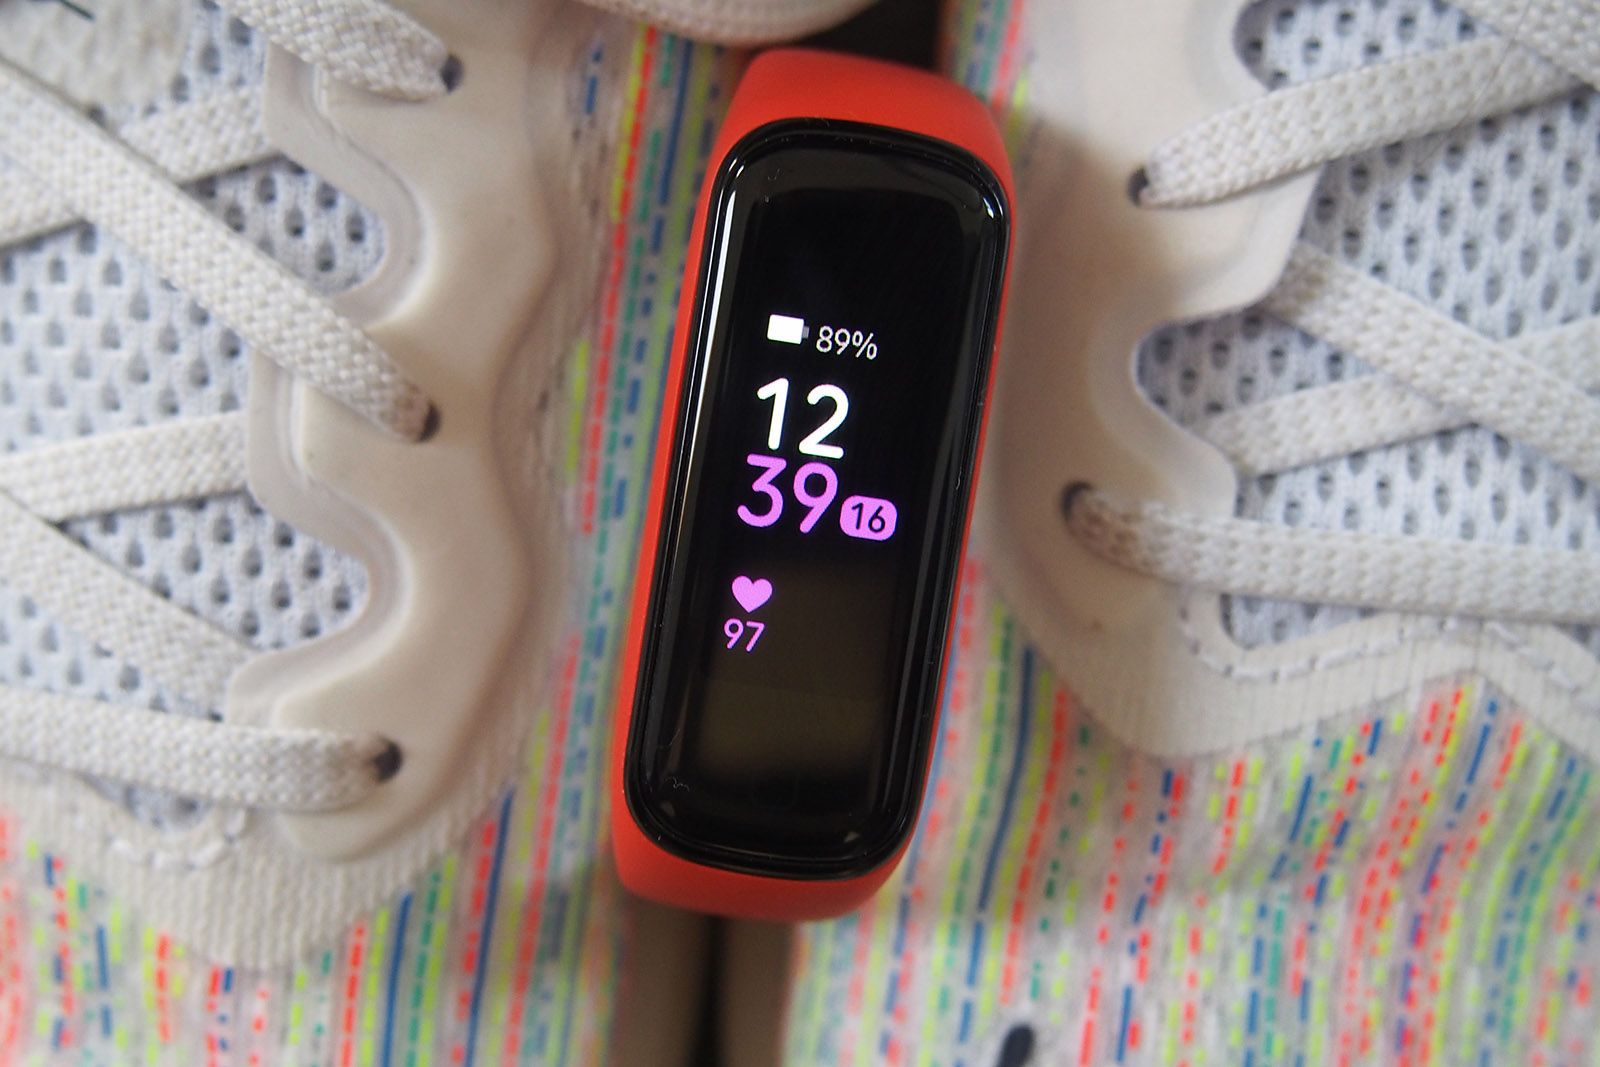 Samsung Galaxy Fit 3 rumors: What we know, and what we’d like to see